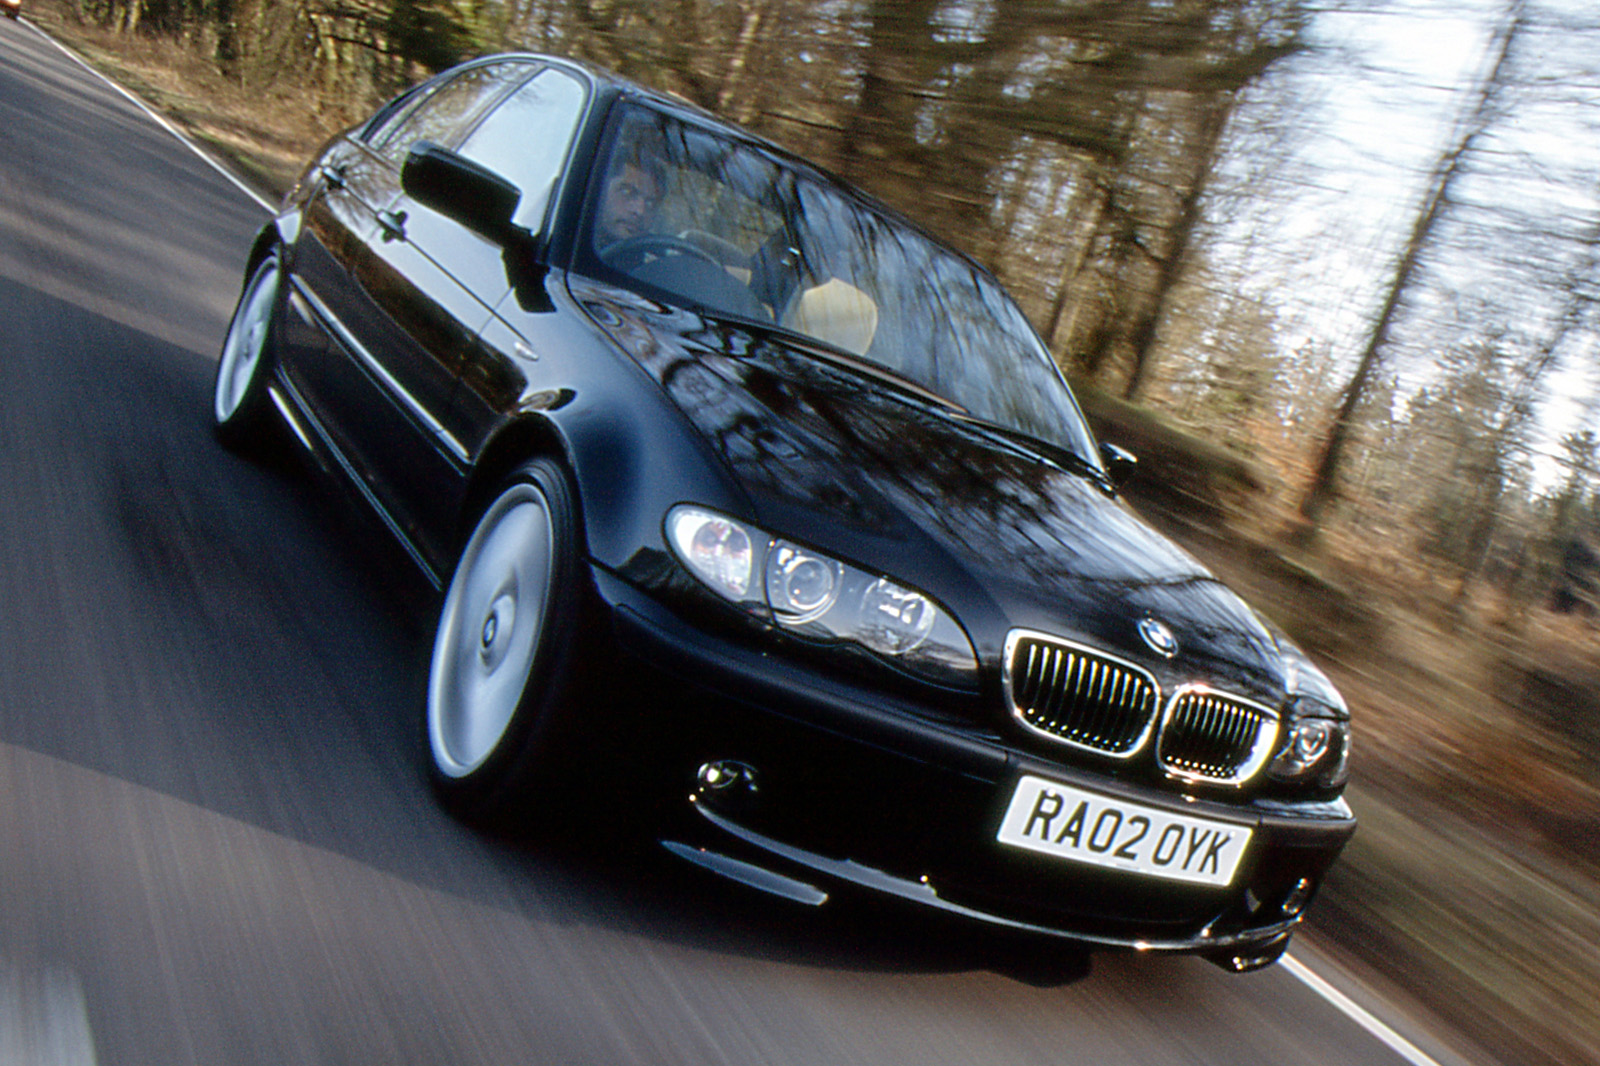 The E46 3 BMW Series is Still a Great Car to Own